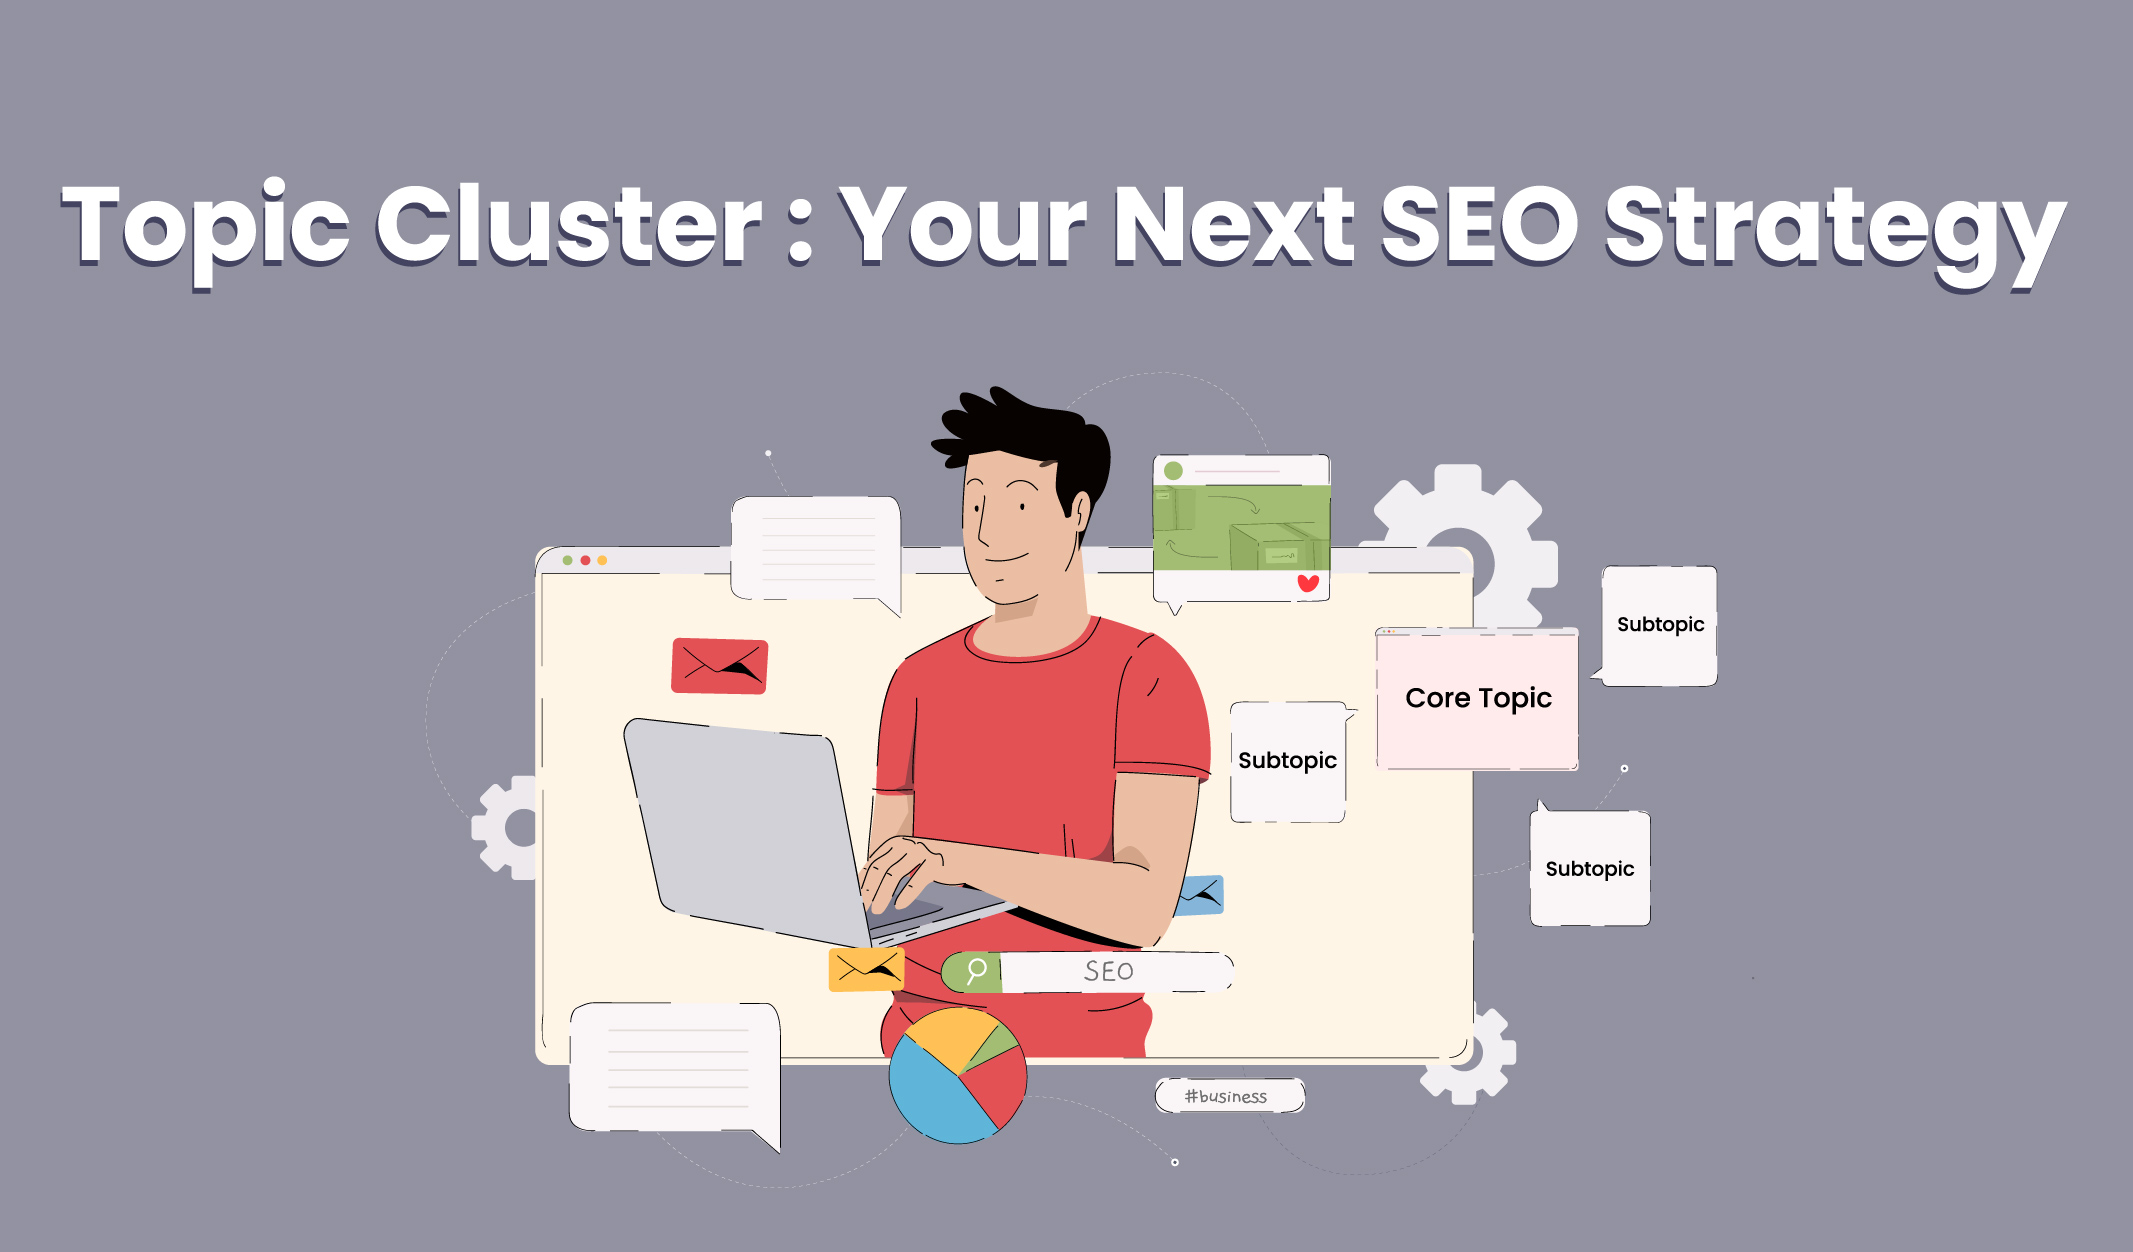 Topic cluster: Your Next SEO strategy